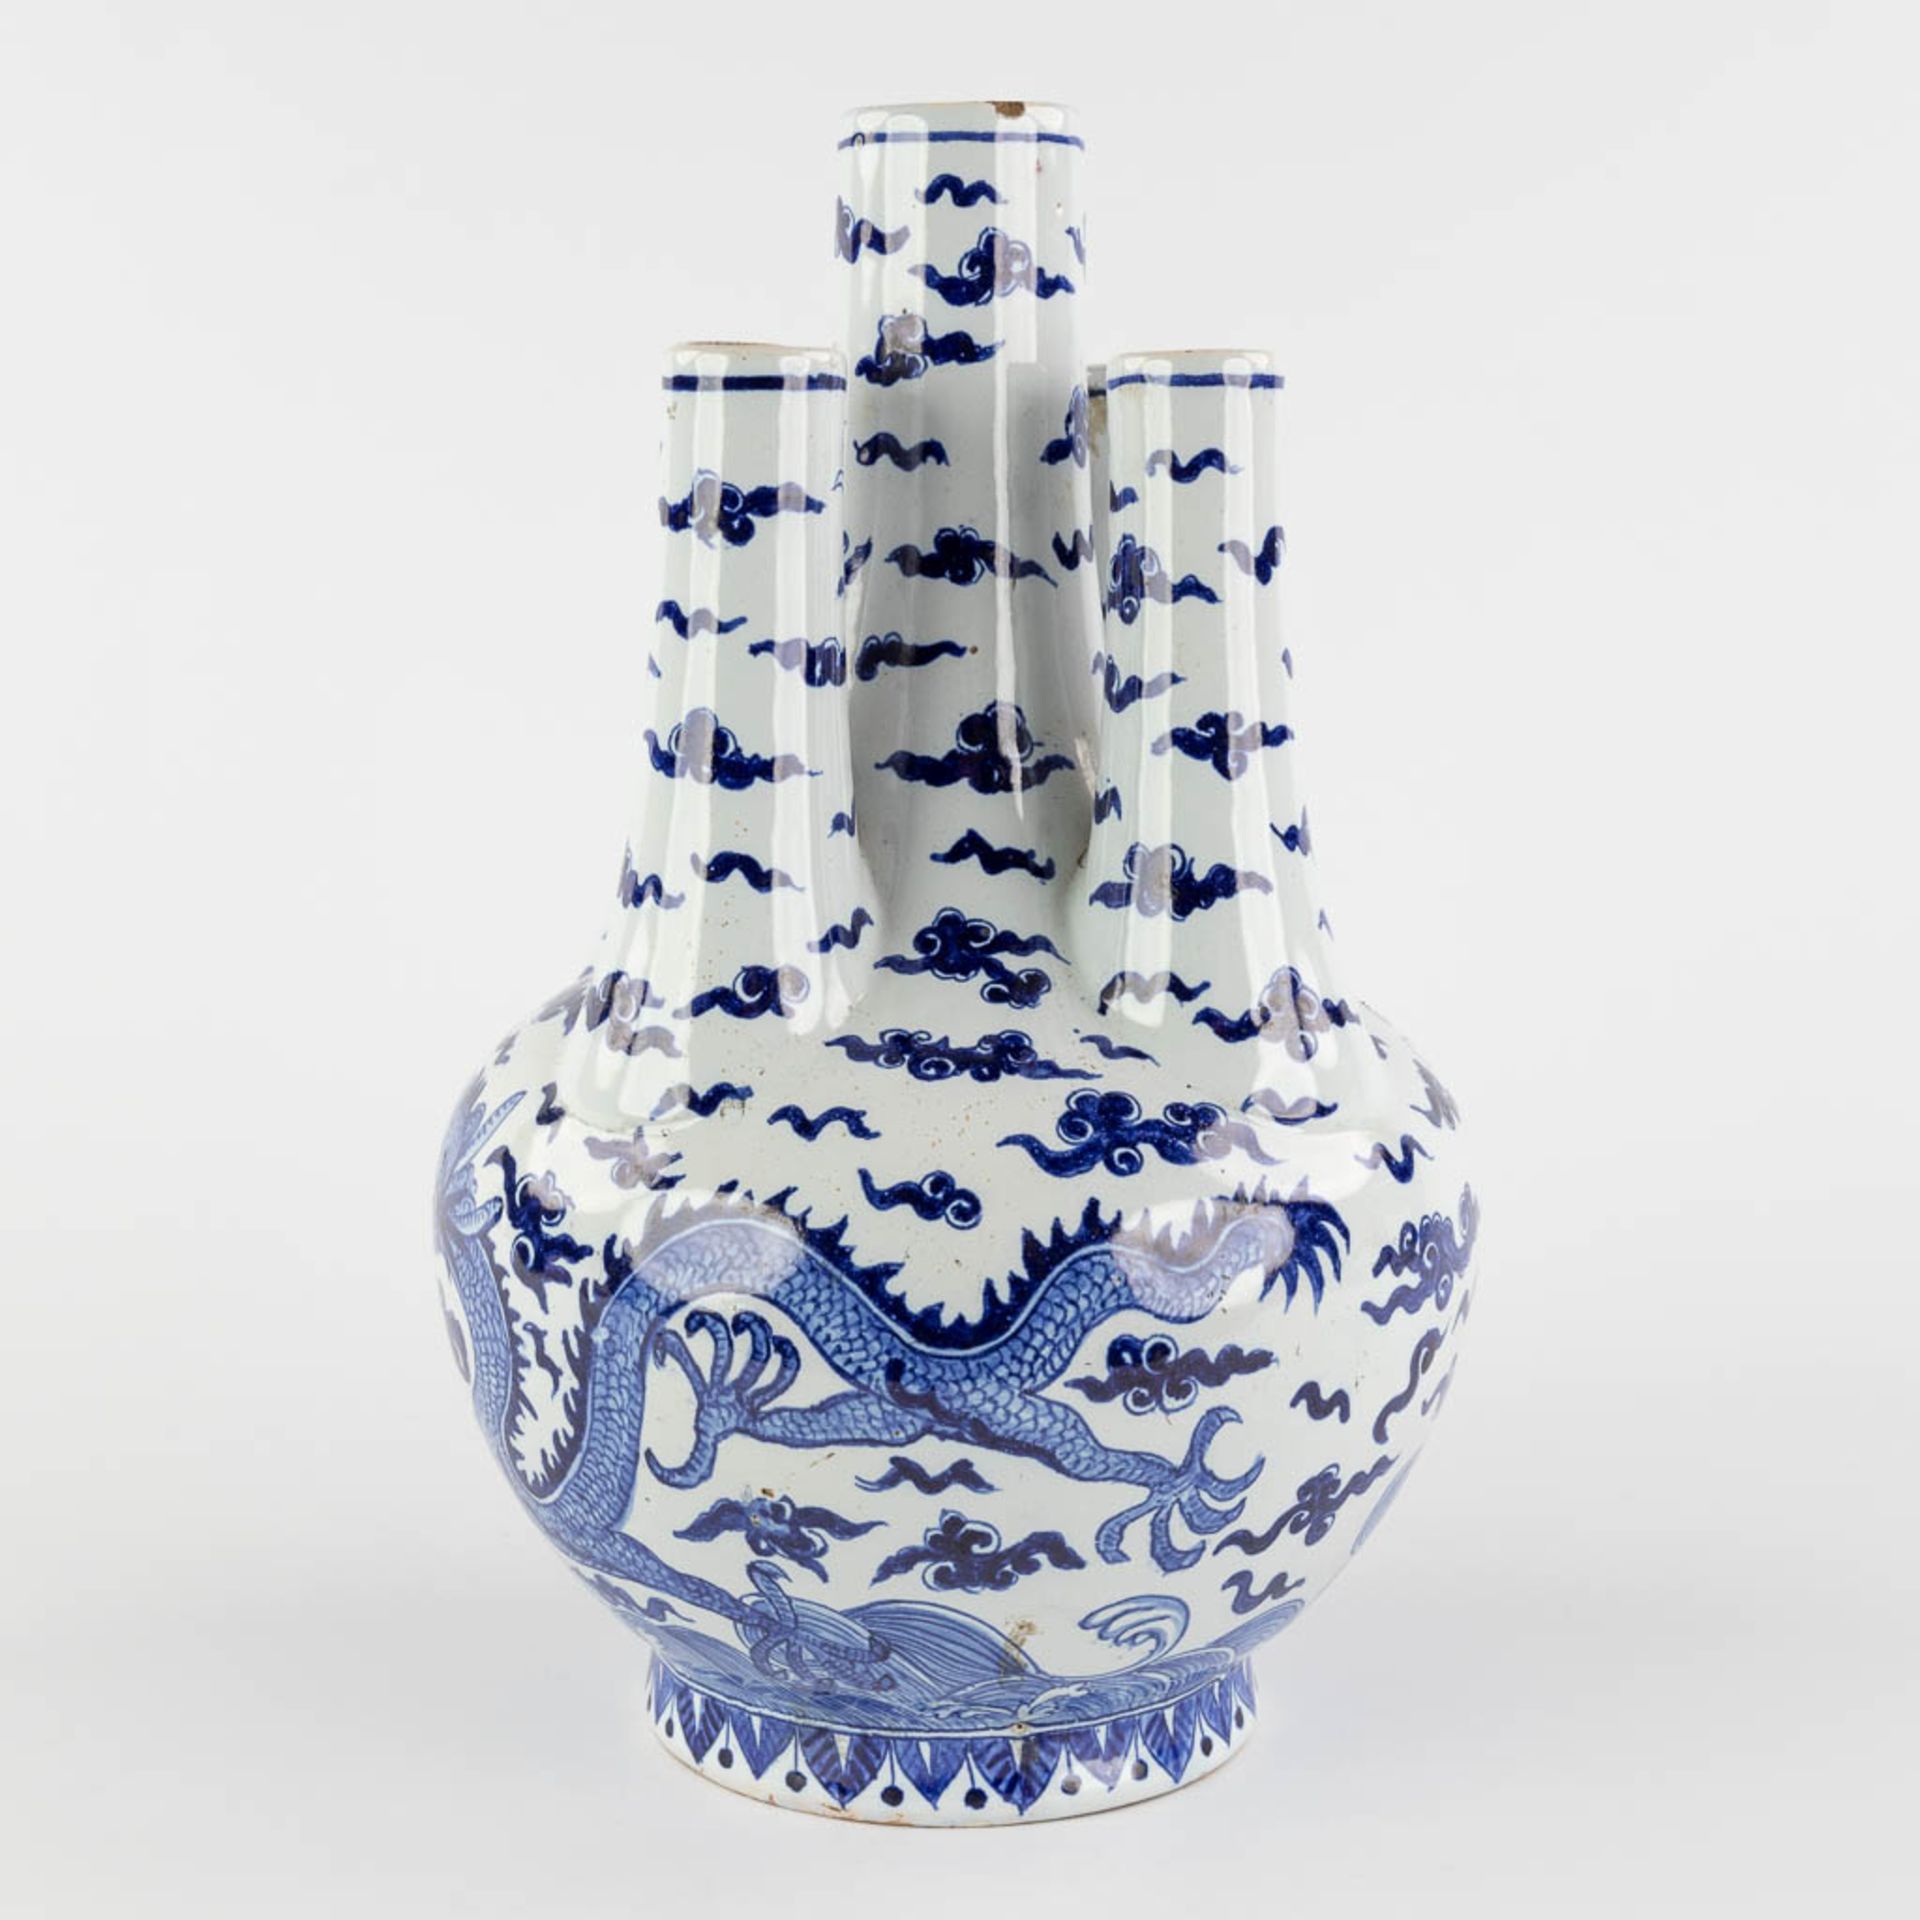 Charles-François Fourmaintraux-Courquin, a tulip vase with Chinoiserie dragon decor France. 19th C. - Image 4 of 15